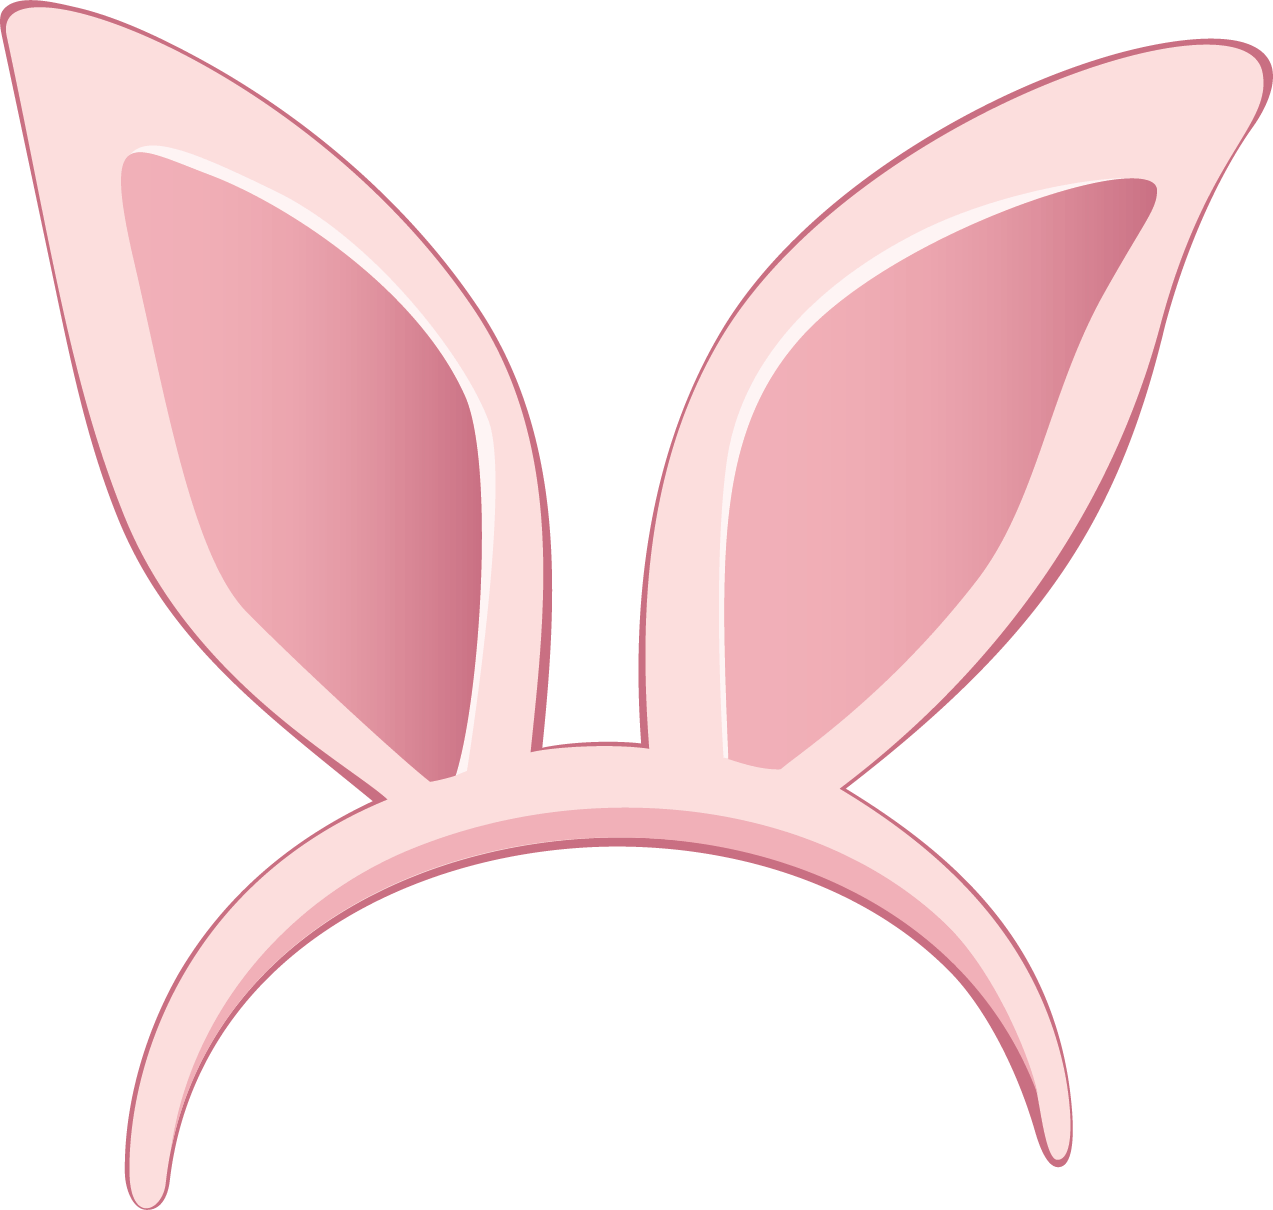 Ears drawing at getdrawings. Mouse clipart rabbit